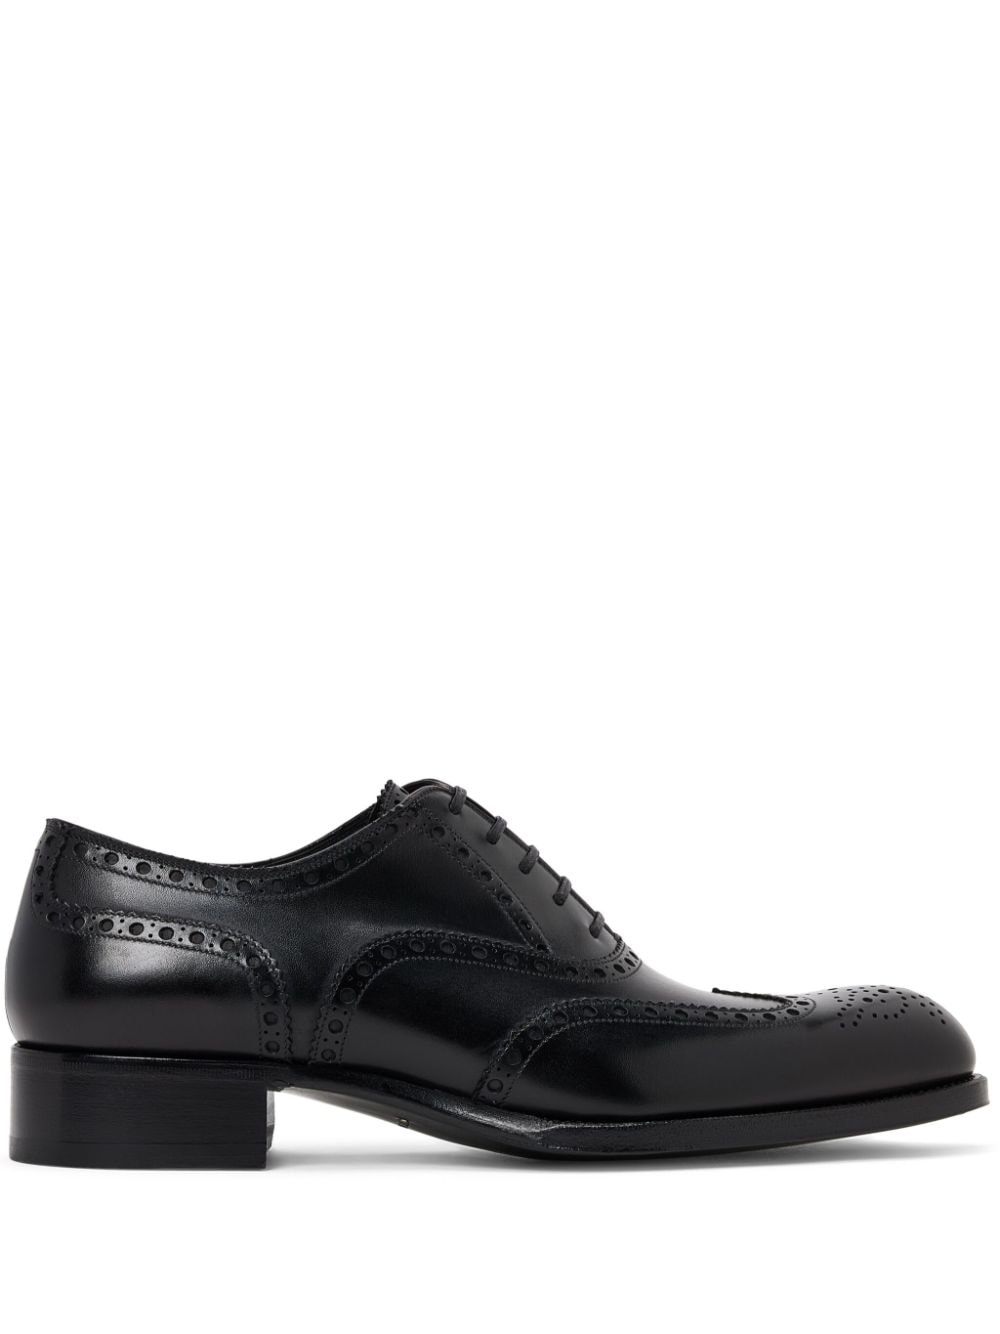 TOM FORD leather brogues - Black von TOM FORD